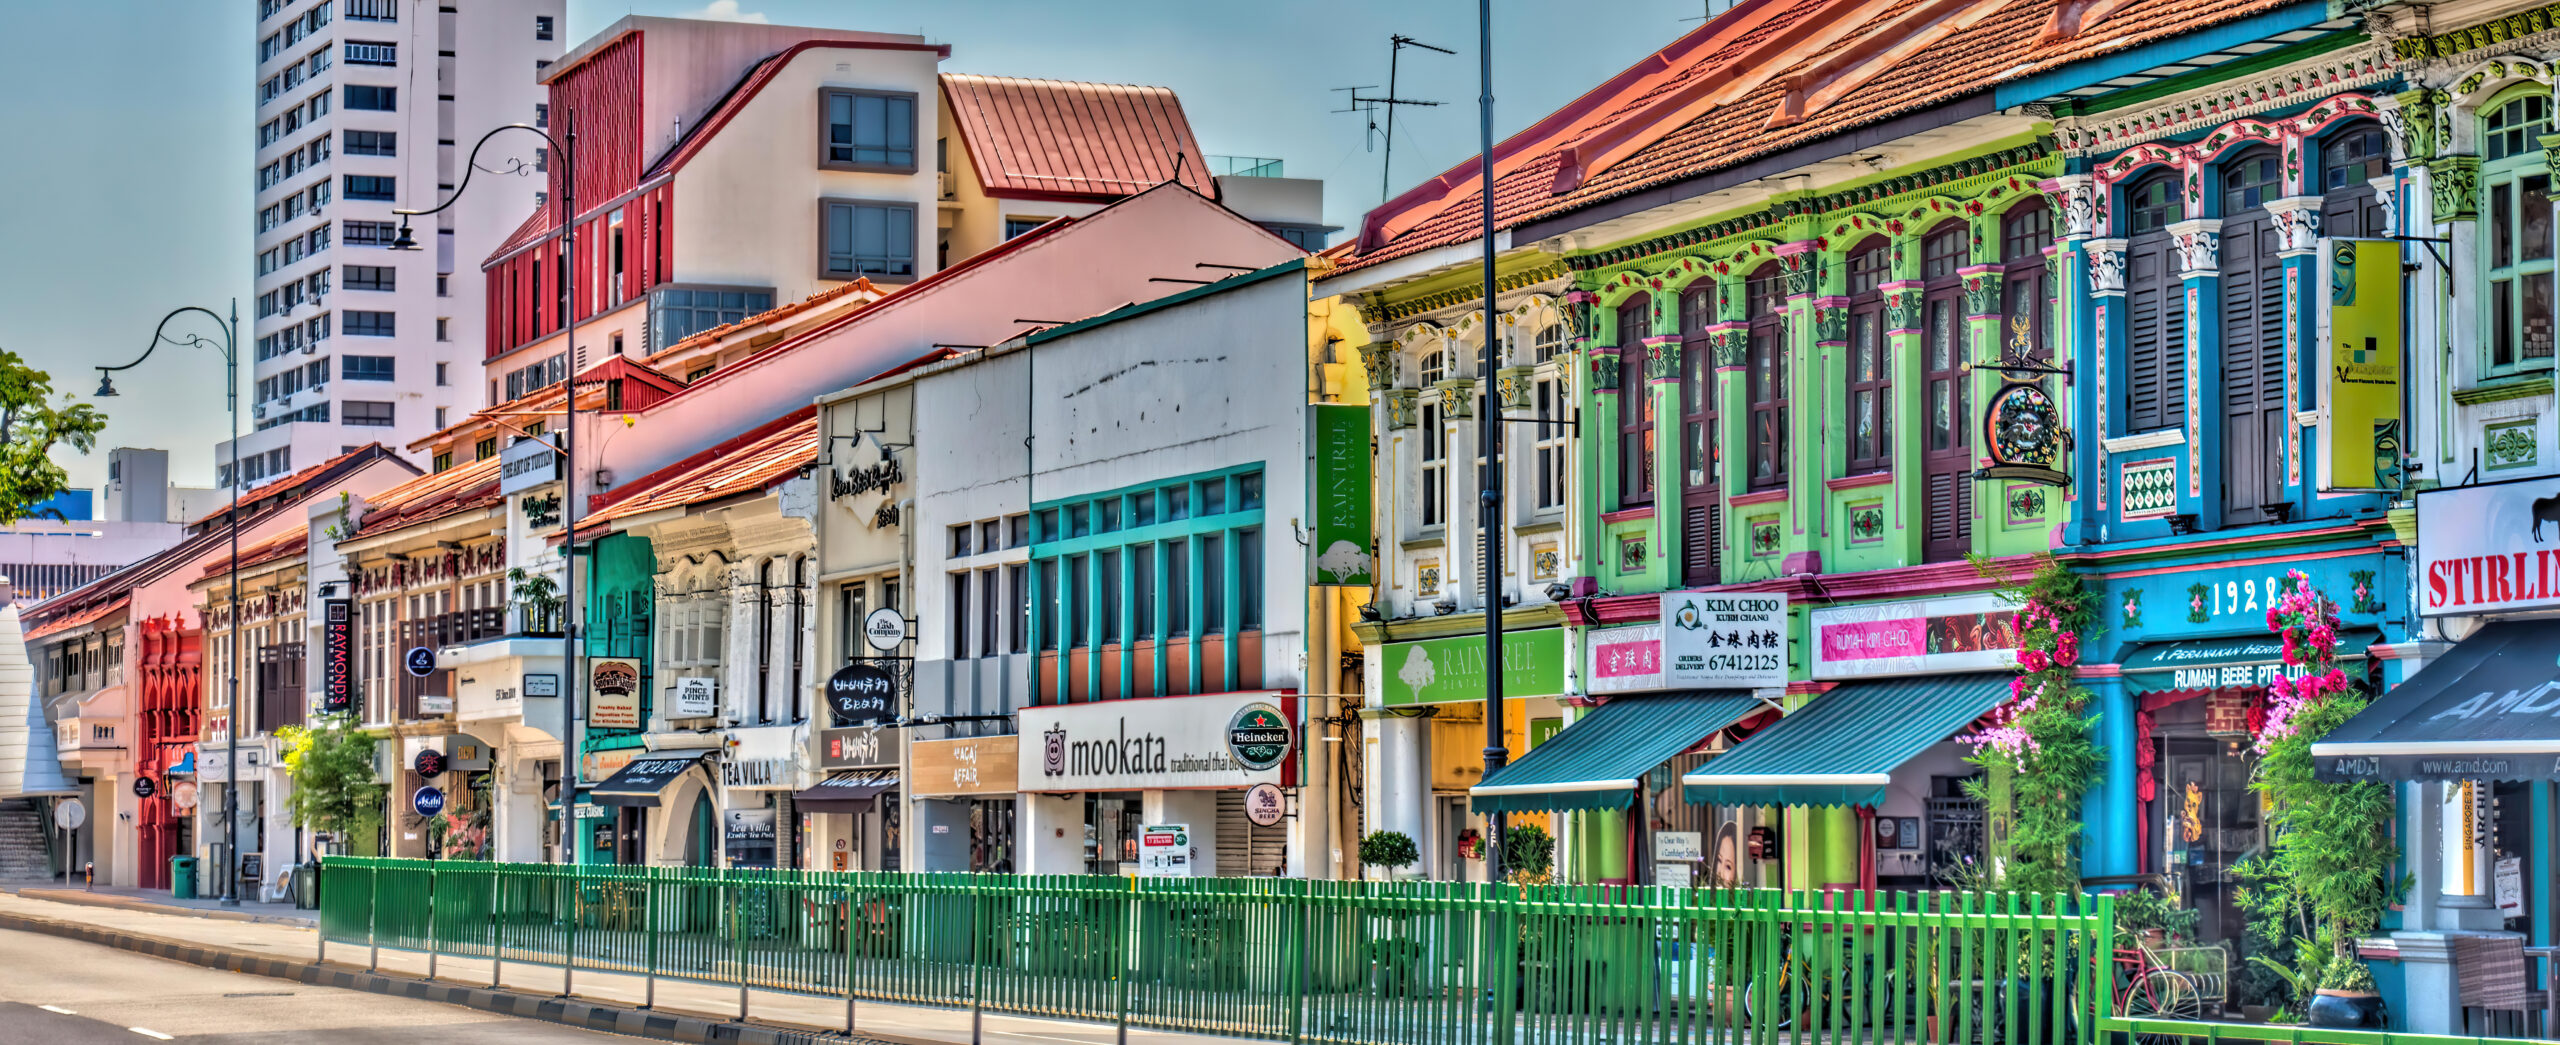 A snapshot of traditional shophouses along the stretch of Joo Chiat Road in Katong